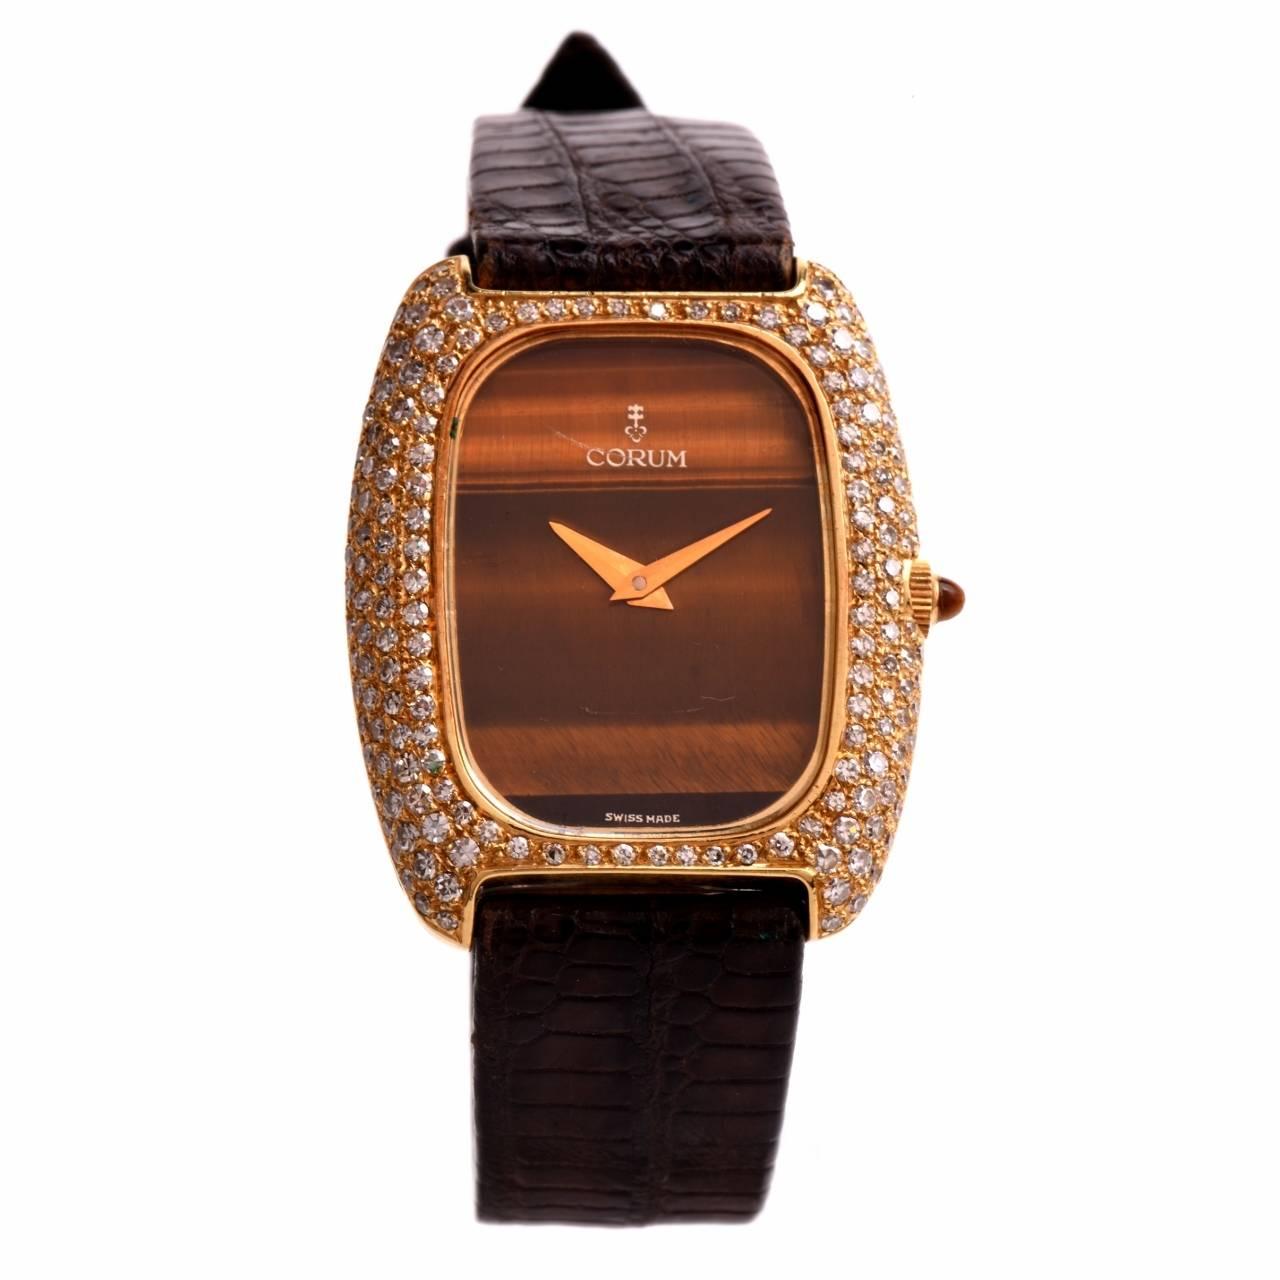 This 1960's Corum wristwatch with a diamond bezel and a tiger's eye dial is crafted in 18K yellow gold. The case measures 35 mm x 30 mm. The eye-catching stylized rectangular case is adorned with 3.00 cts of pave diamonds graded H-I color and VS